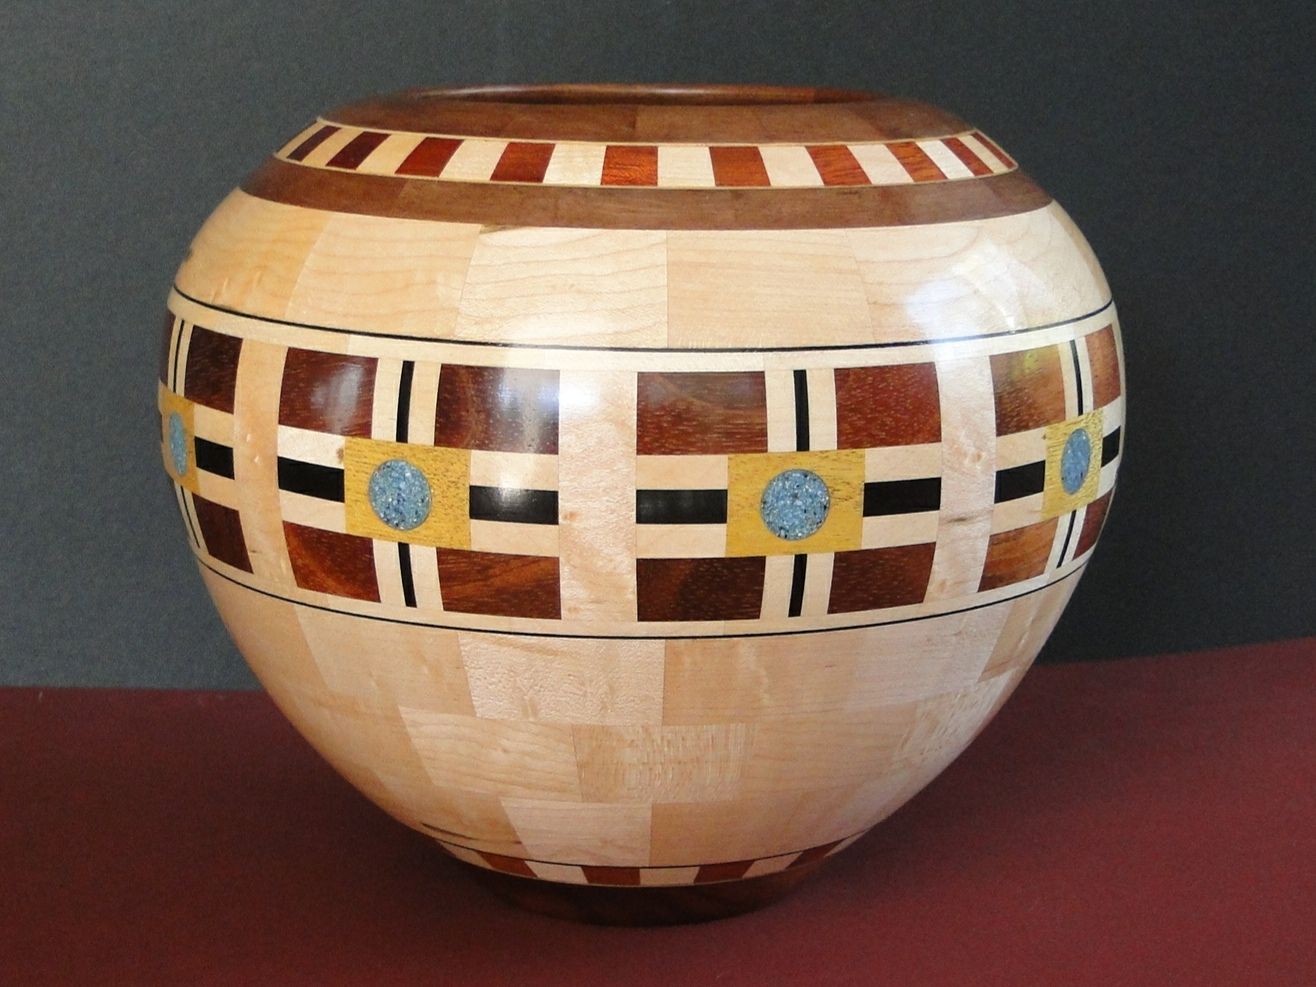 Segmented Vessel with Inlace